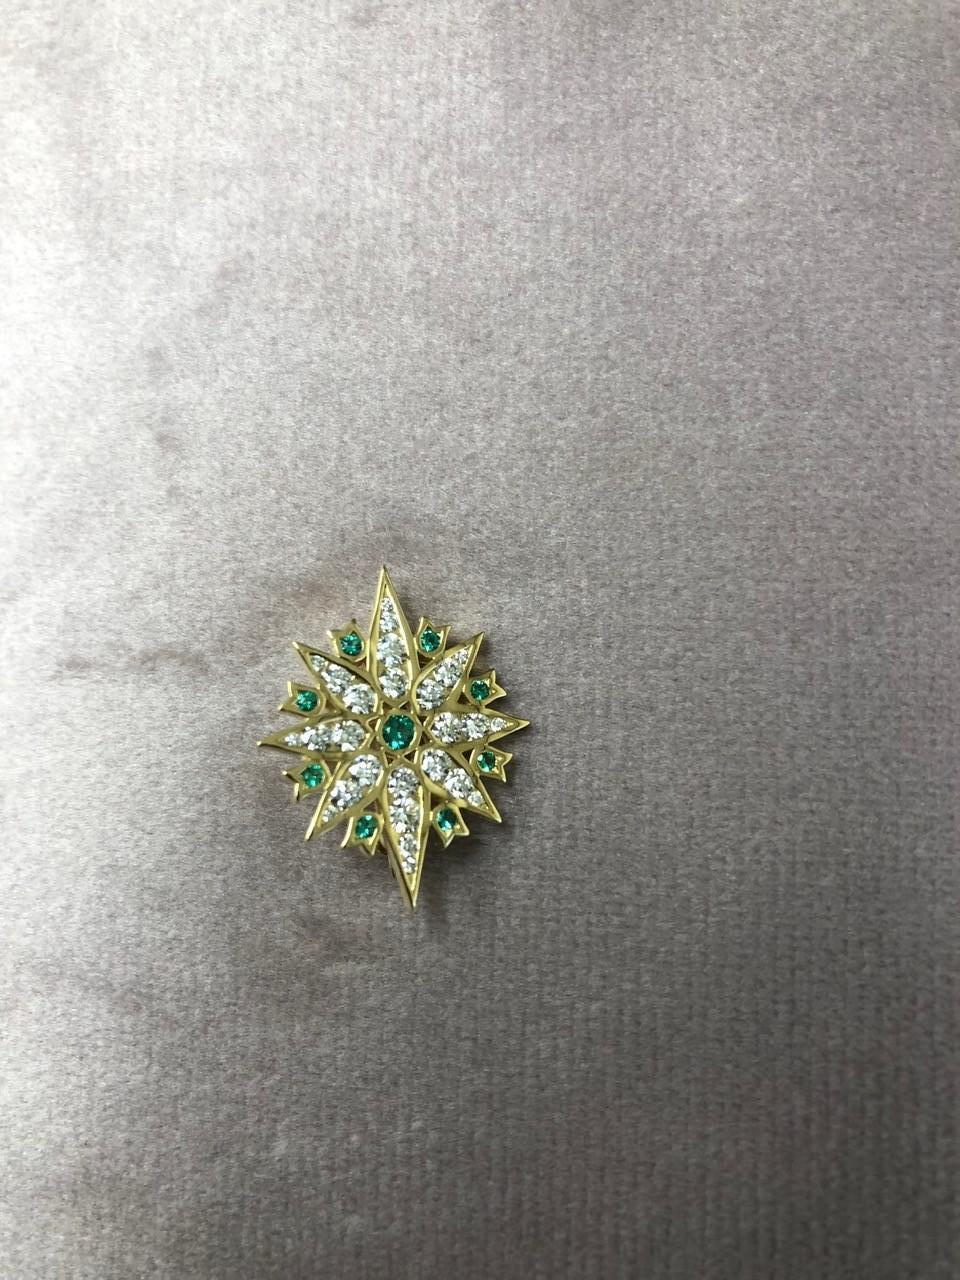 Created in 18 karat yellow gold
Diamonds 0.60 carat approx.
Emeralds 0.11 carat approx.
Limited Edition

About the Designers ~ Dharmesh & Namrata

Drawing inspiration from little things, Dharmesh & Namrata Kothari have created an extraordinary and